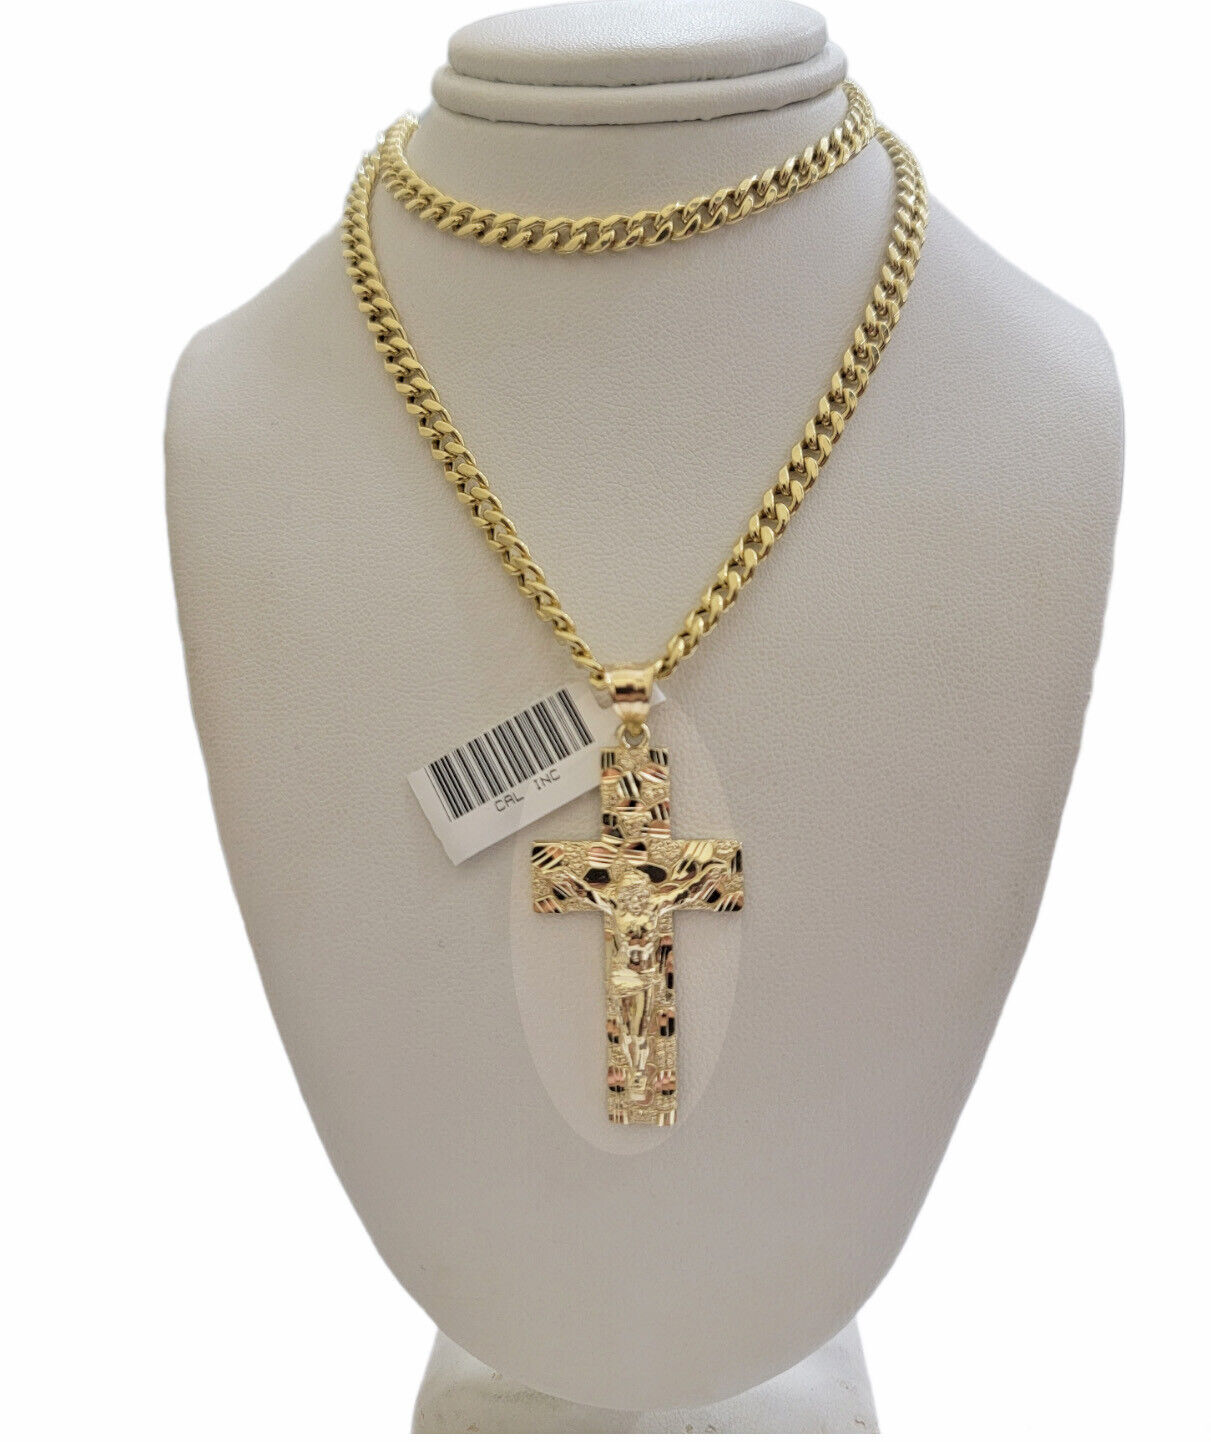 10k Yellow Gold Miami Cuban link Chain Nugget Charm Pendant Necklace 5mm 18